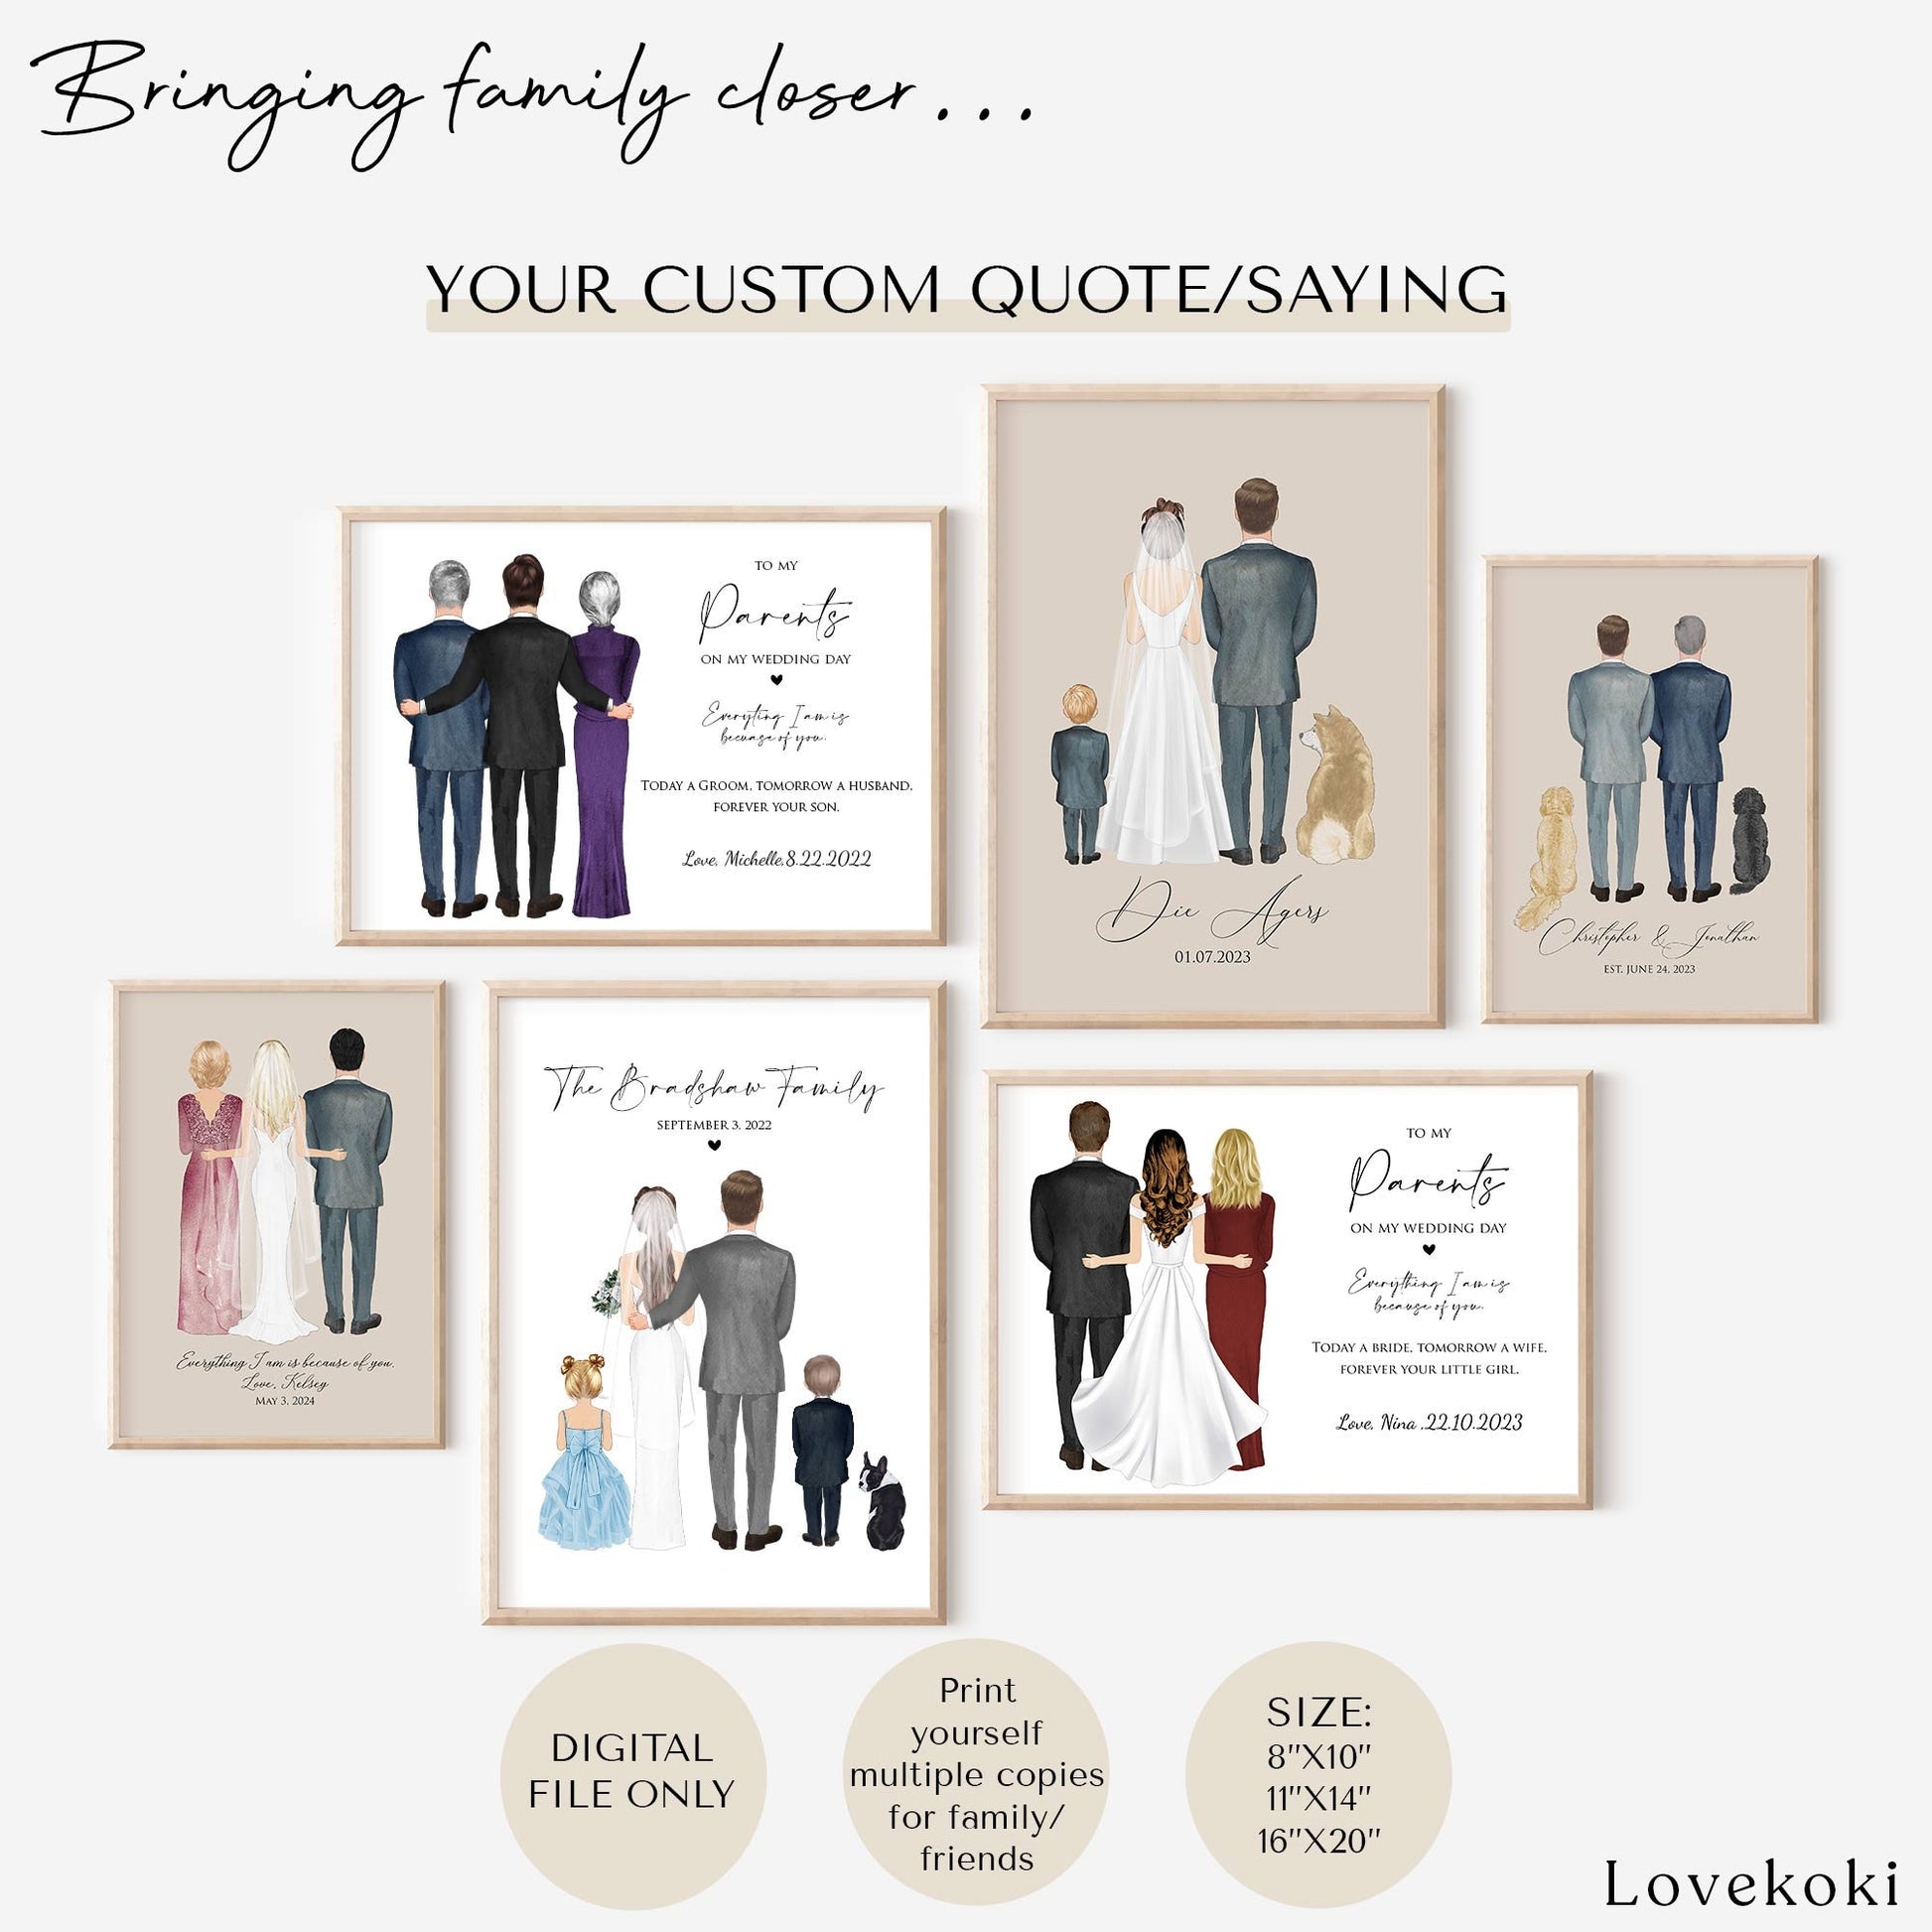 Wedding Illustration Wall Art Gift for Parents of the Bride on Wedding Day